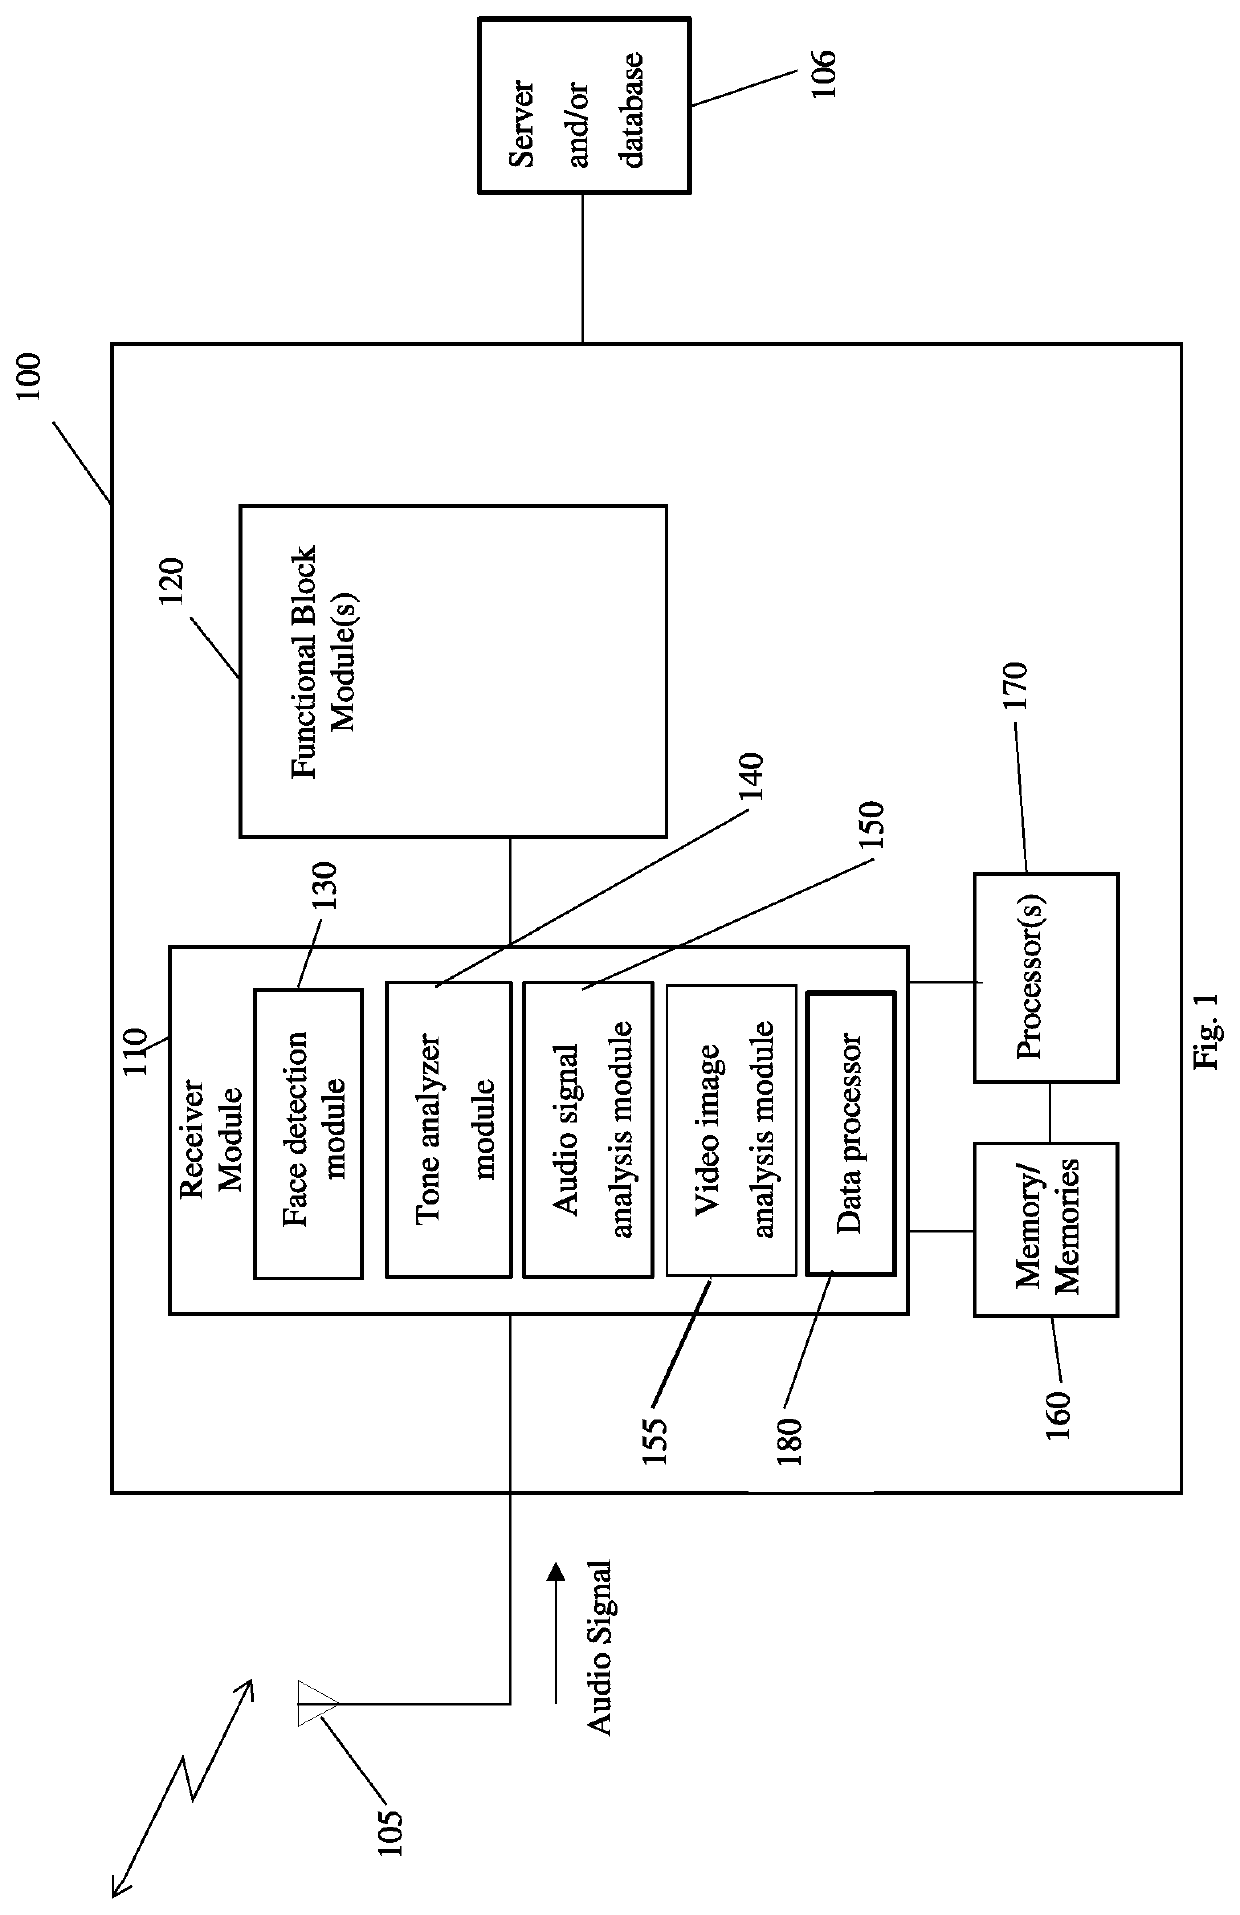 System and Method for Visual Analysis of Emotional Coherence in Videos